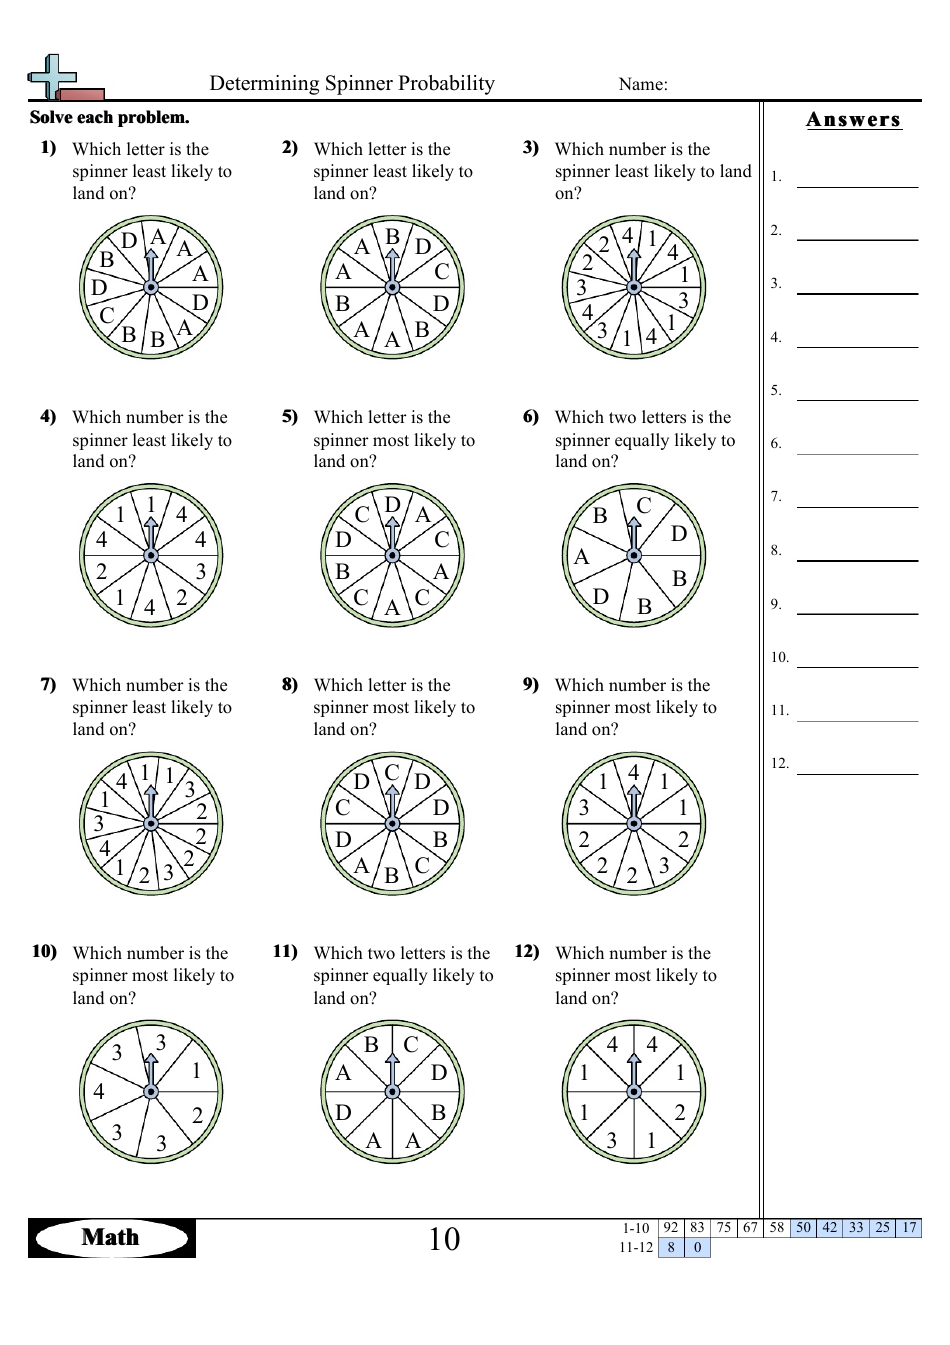 Determining Spinner Probability Worksheet Image Preview